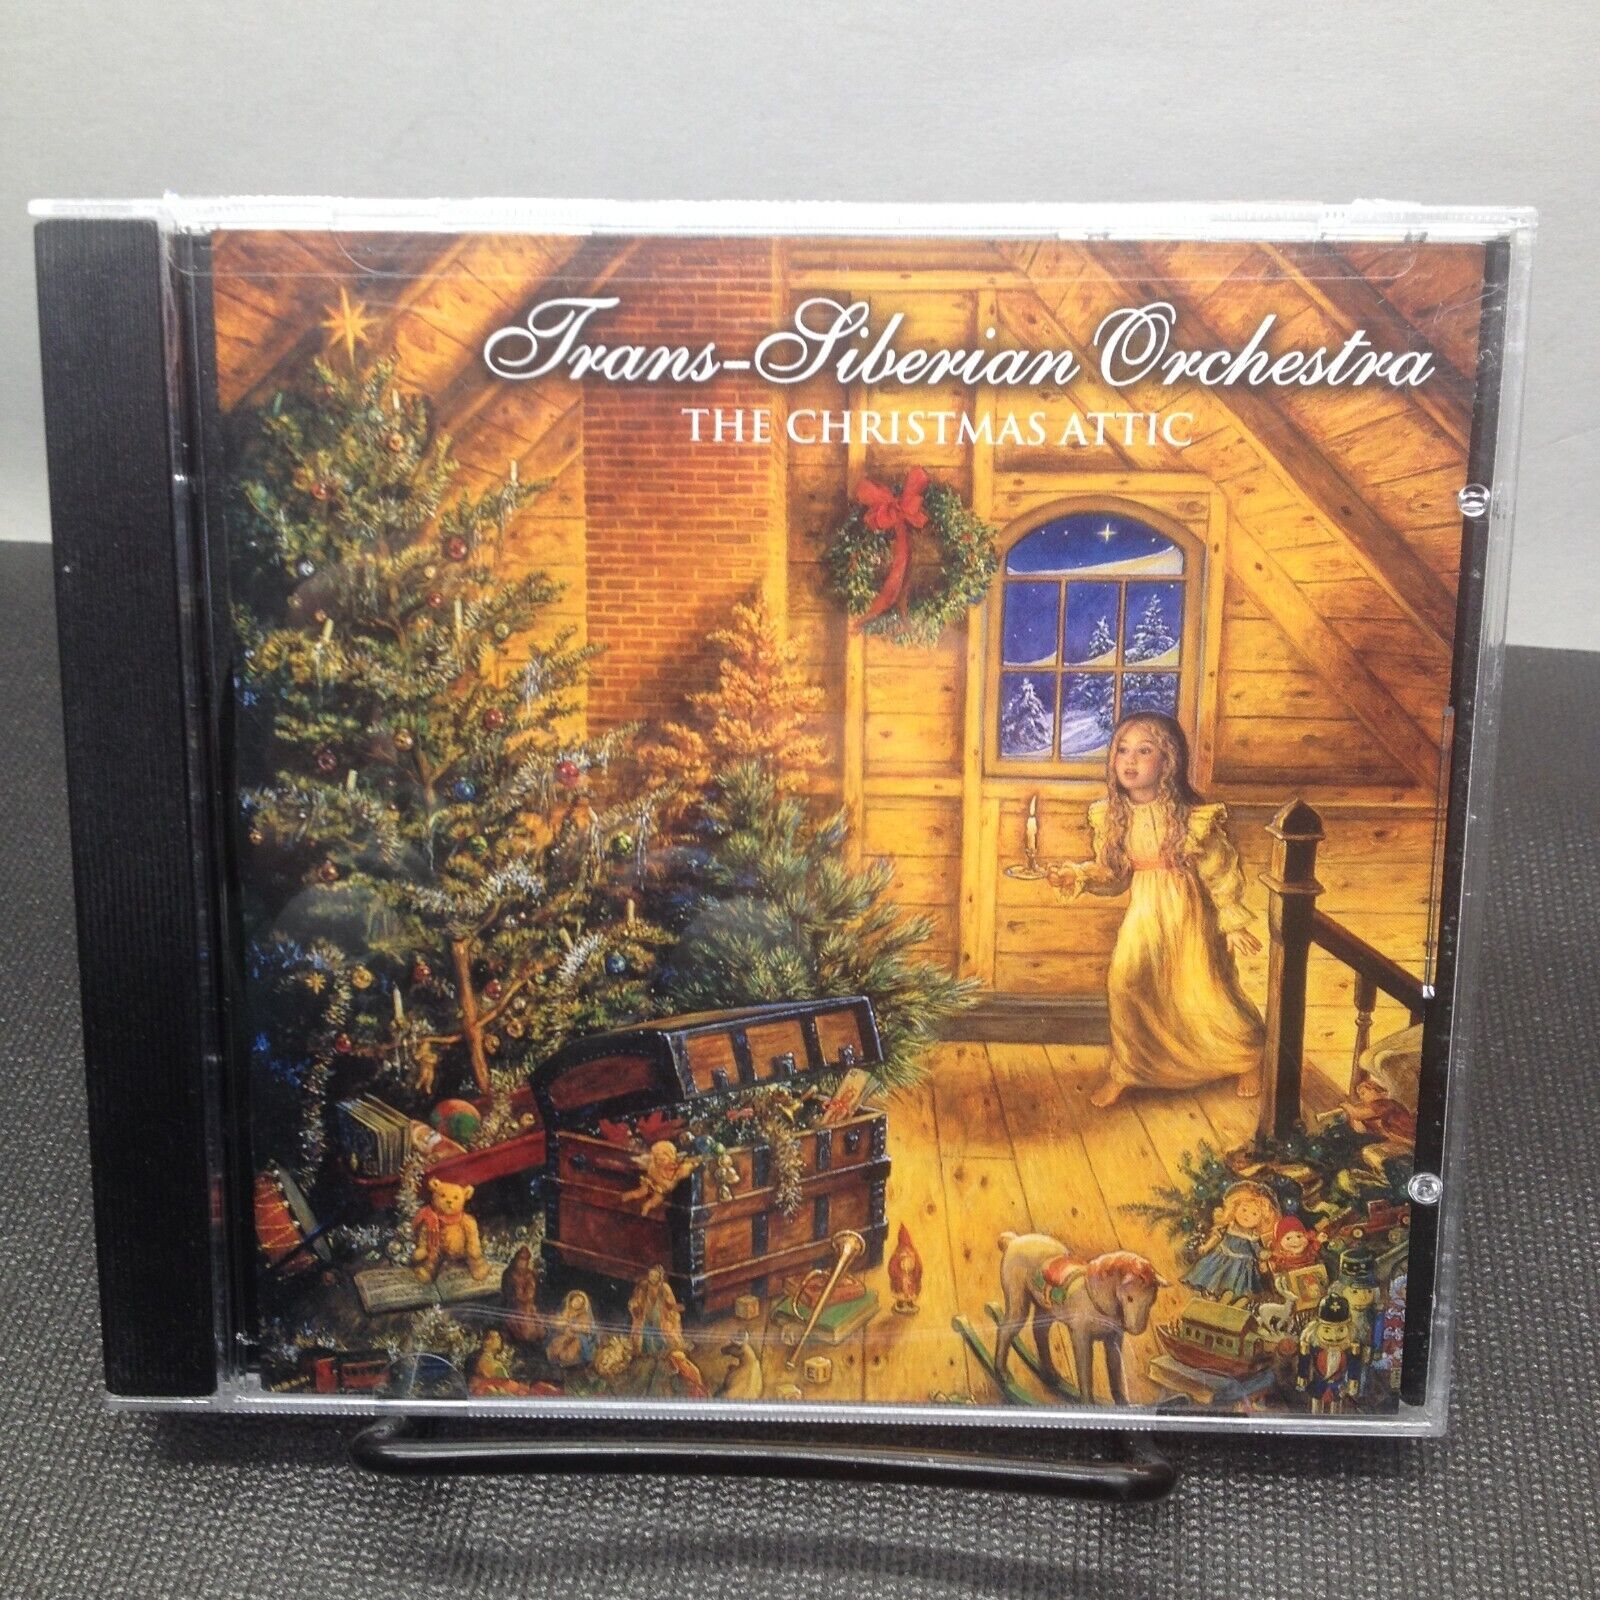 Primary image for Xmas Attic by Trans-Siberian Orchestra (CD, 1998)